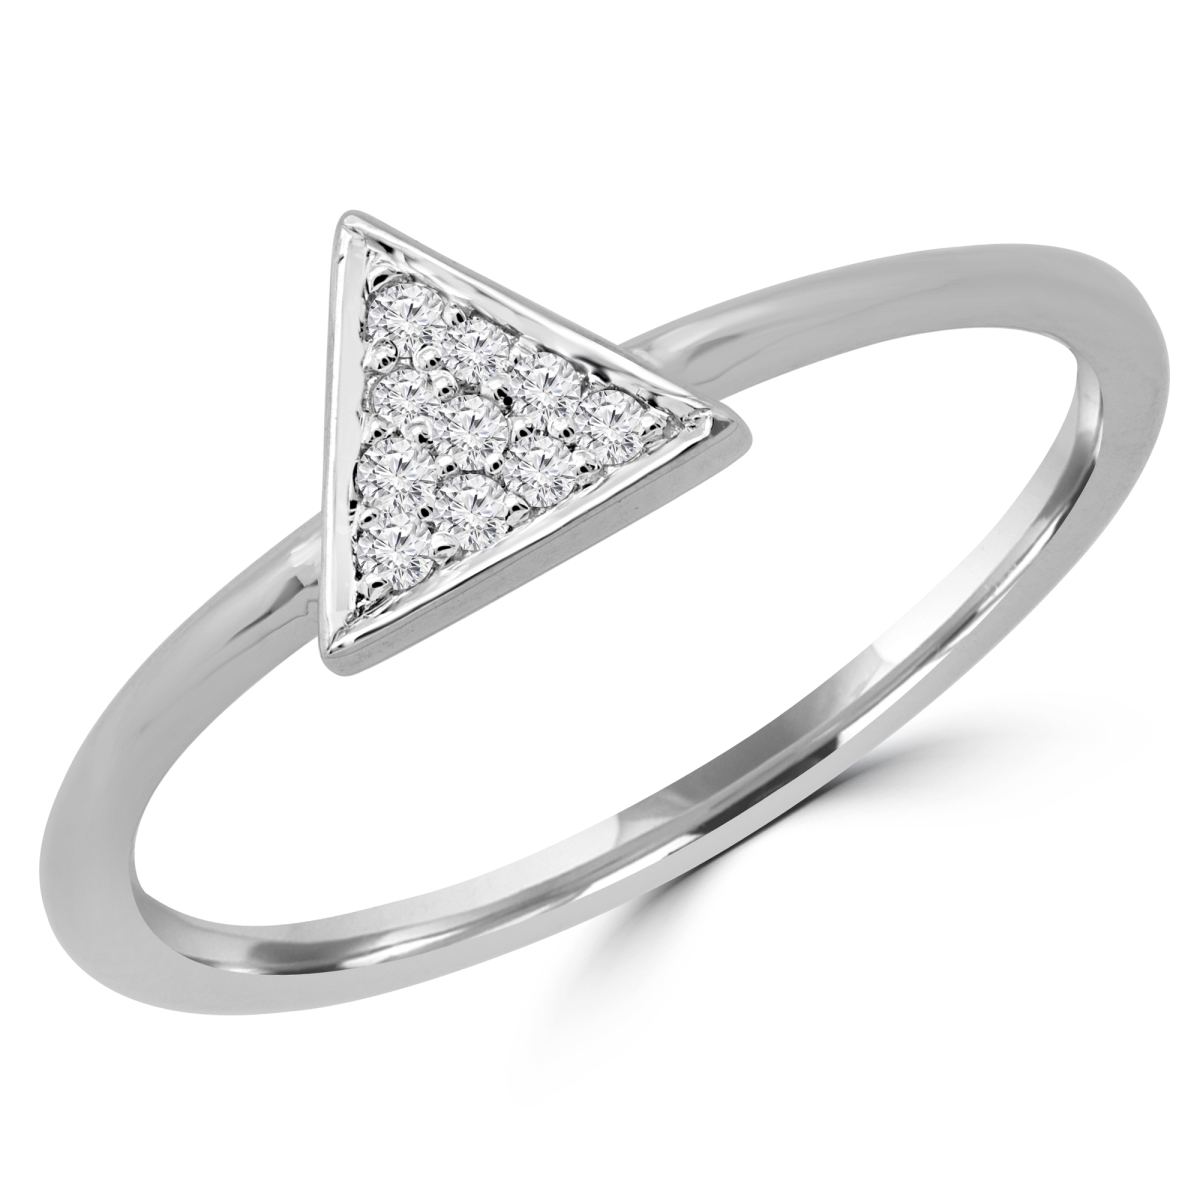 Picture of Majesty Diamonds MDR190069-3.25 0.1 CTW Round Diamond Triangle Cluster Ring in 14K White Gold - Size 3.25